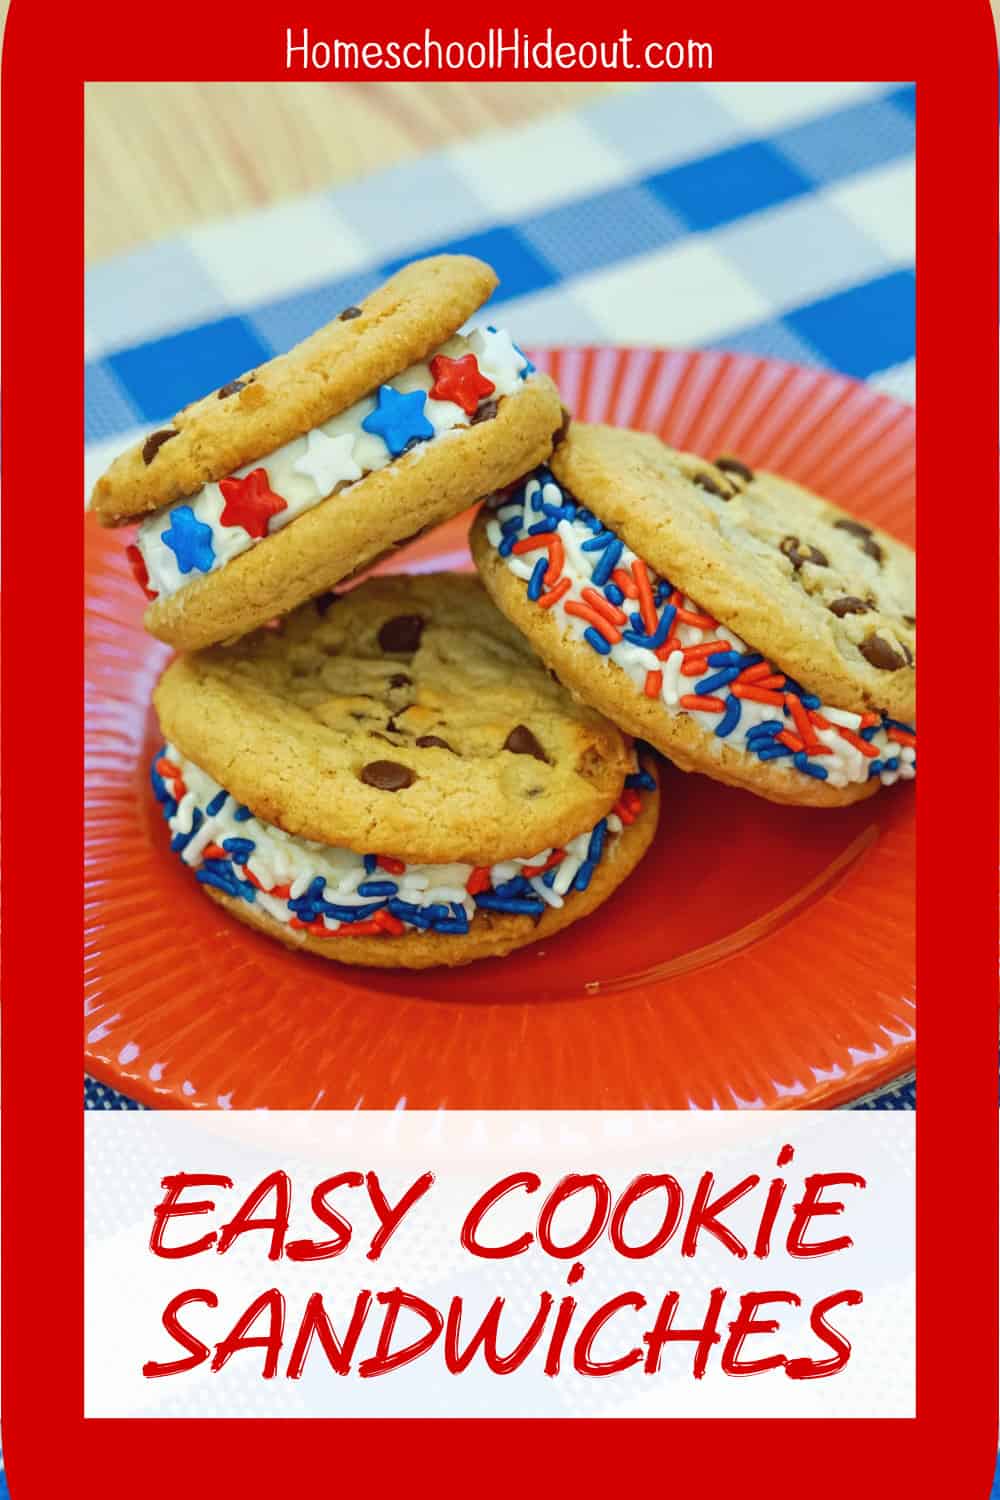 These yummy red, white and blue cookie sandwiches are the perfect treat for hot summer days, barbcues and birthday parties!